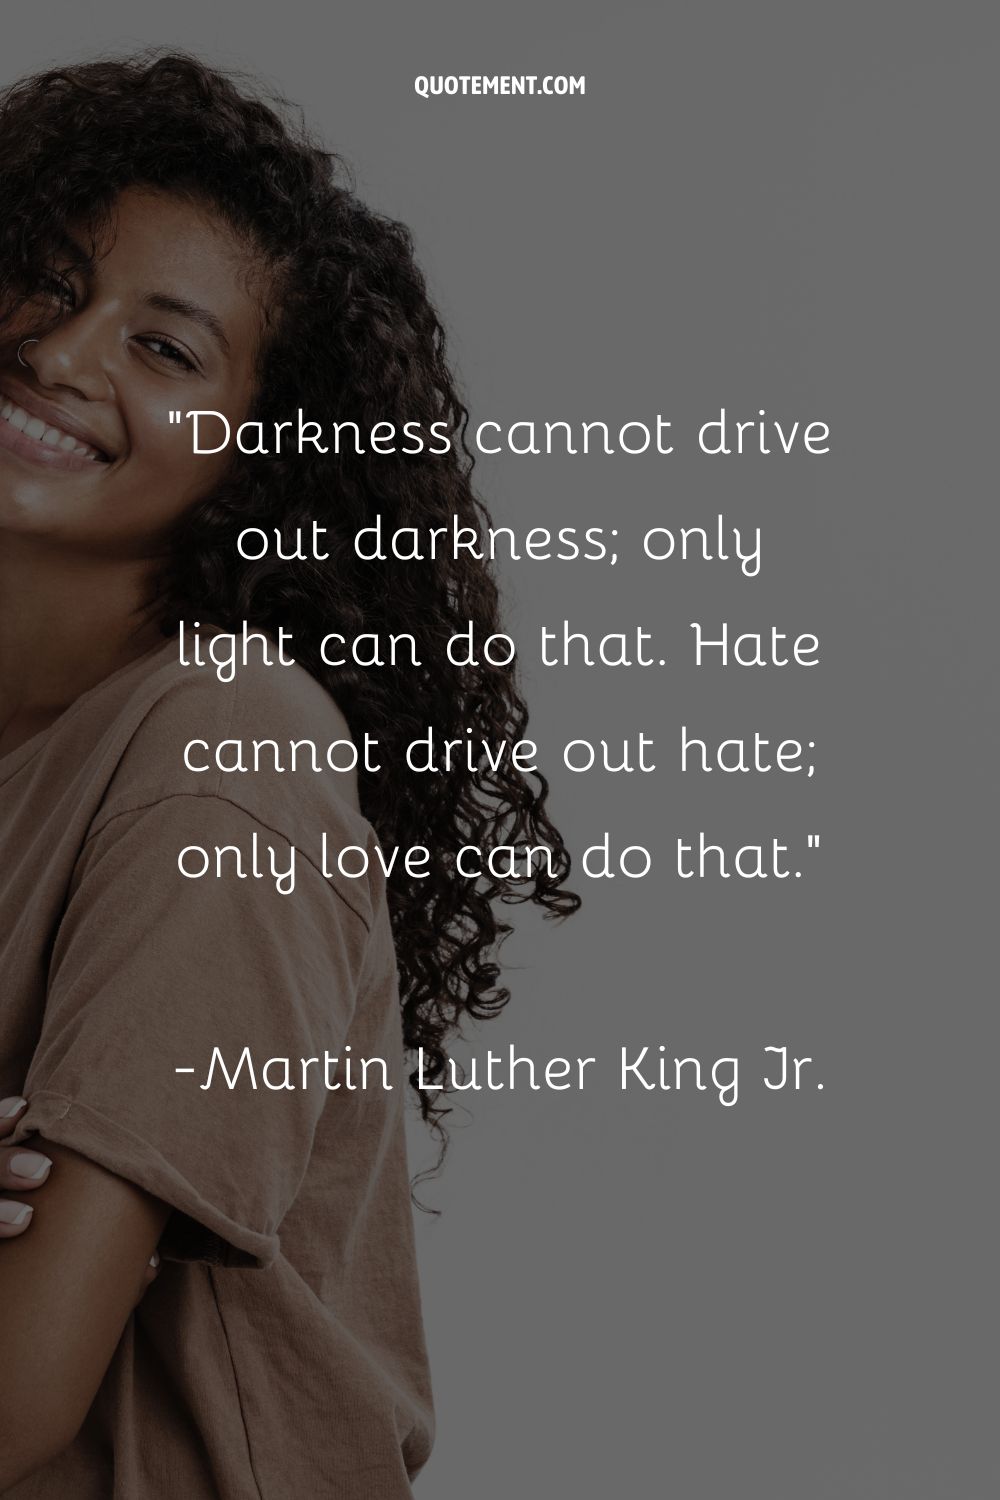 Darkness cannot drive out darkness; only light can do that. Hate cannot drive out hate; only love can do that